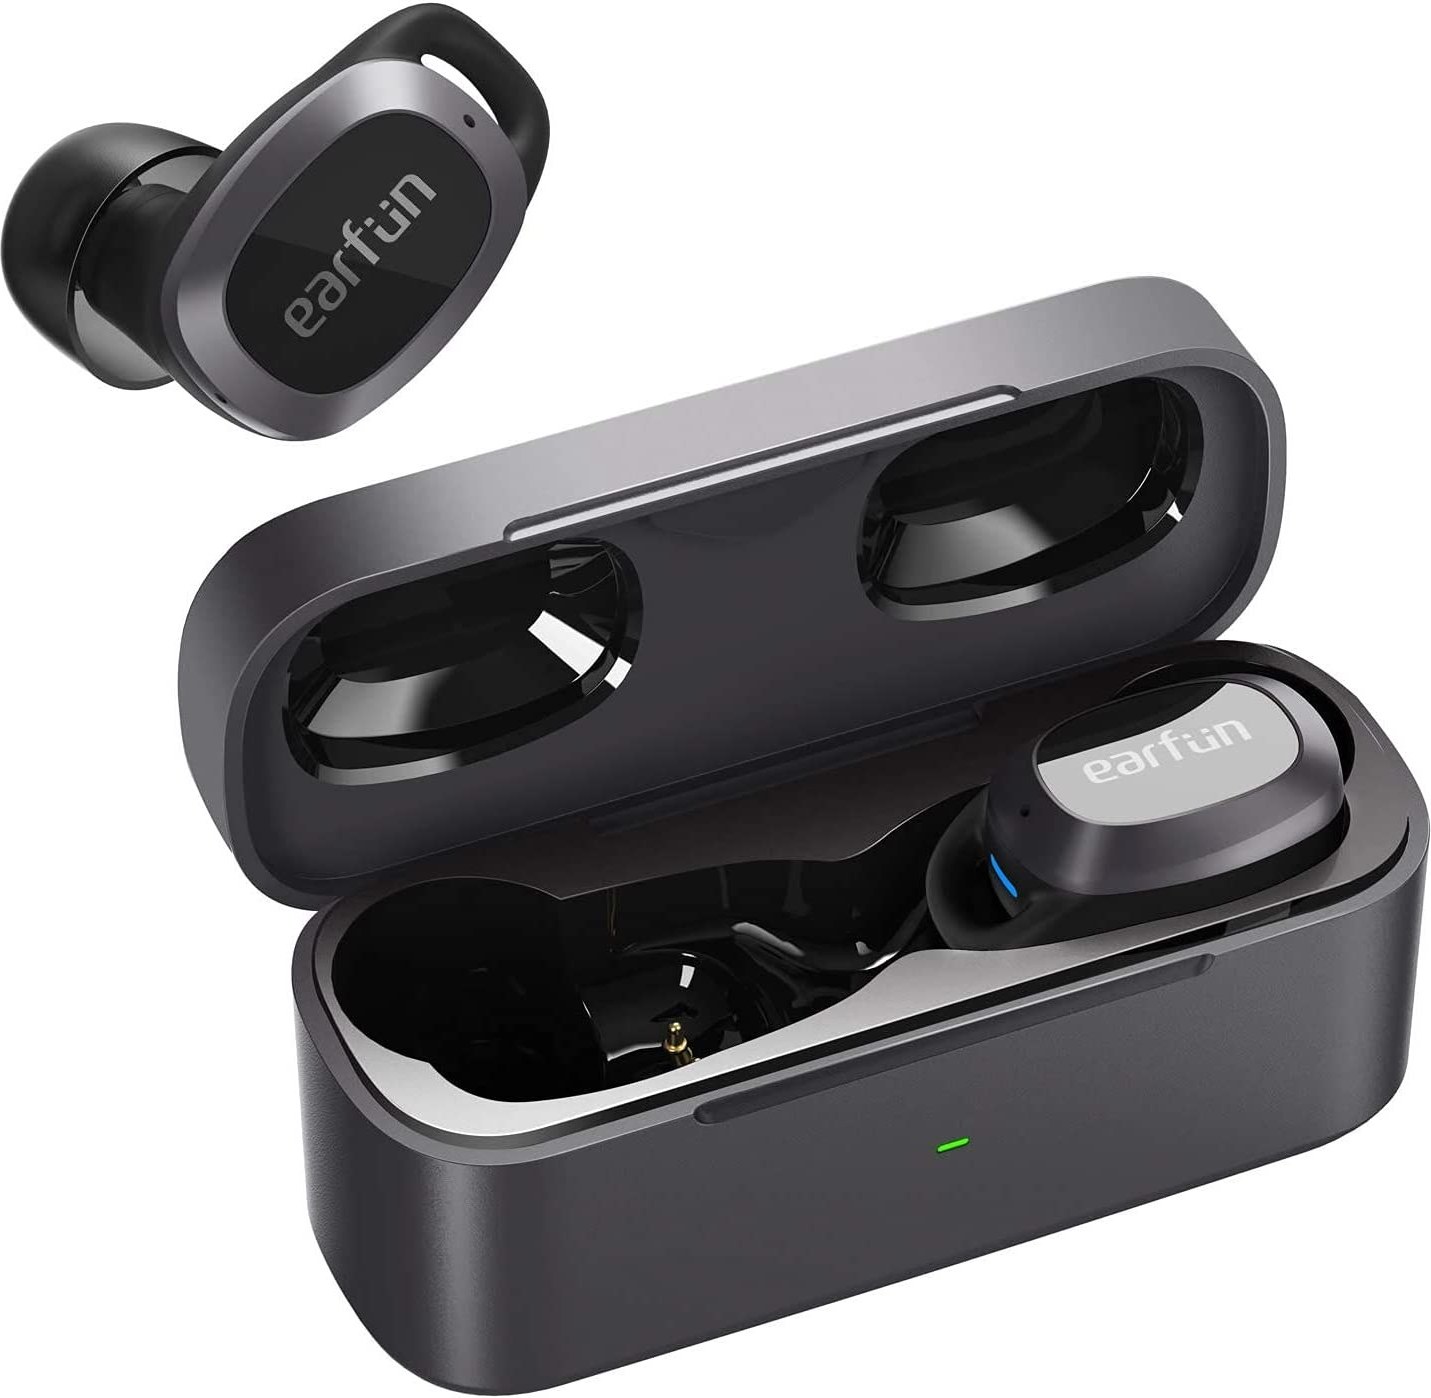 EarFun Air Pro 3 Noise Cancelling Wireless Earbuds, Qualcomm® aptX™  Adaptive Sound, 6 Mics CVC 8.0 ENC, Bluetooth 5.3 Earbuds, Multipoint  Connection